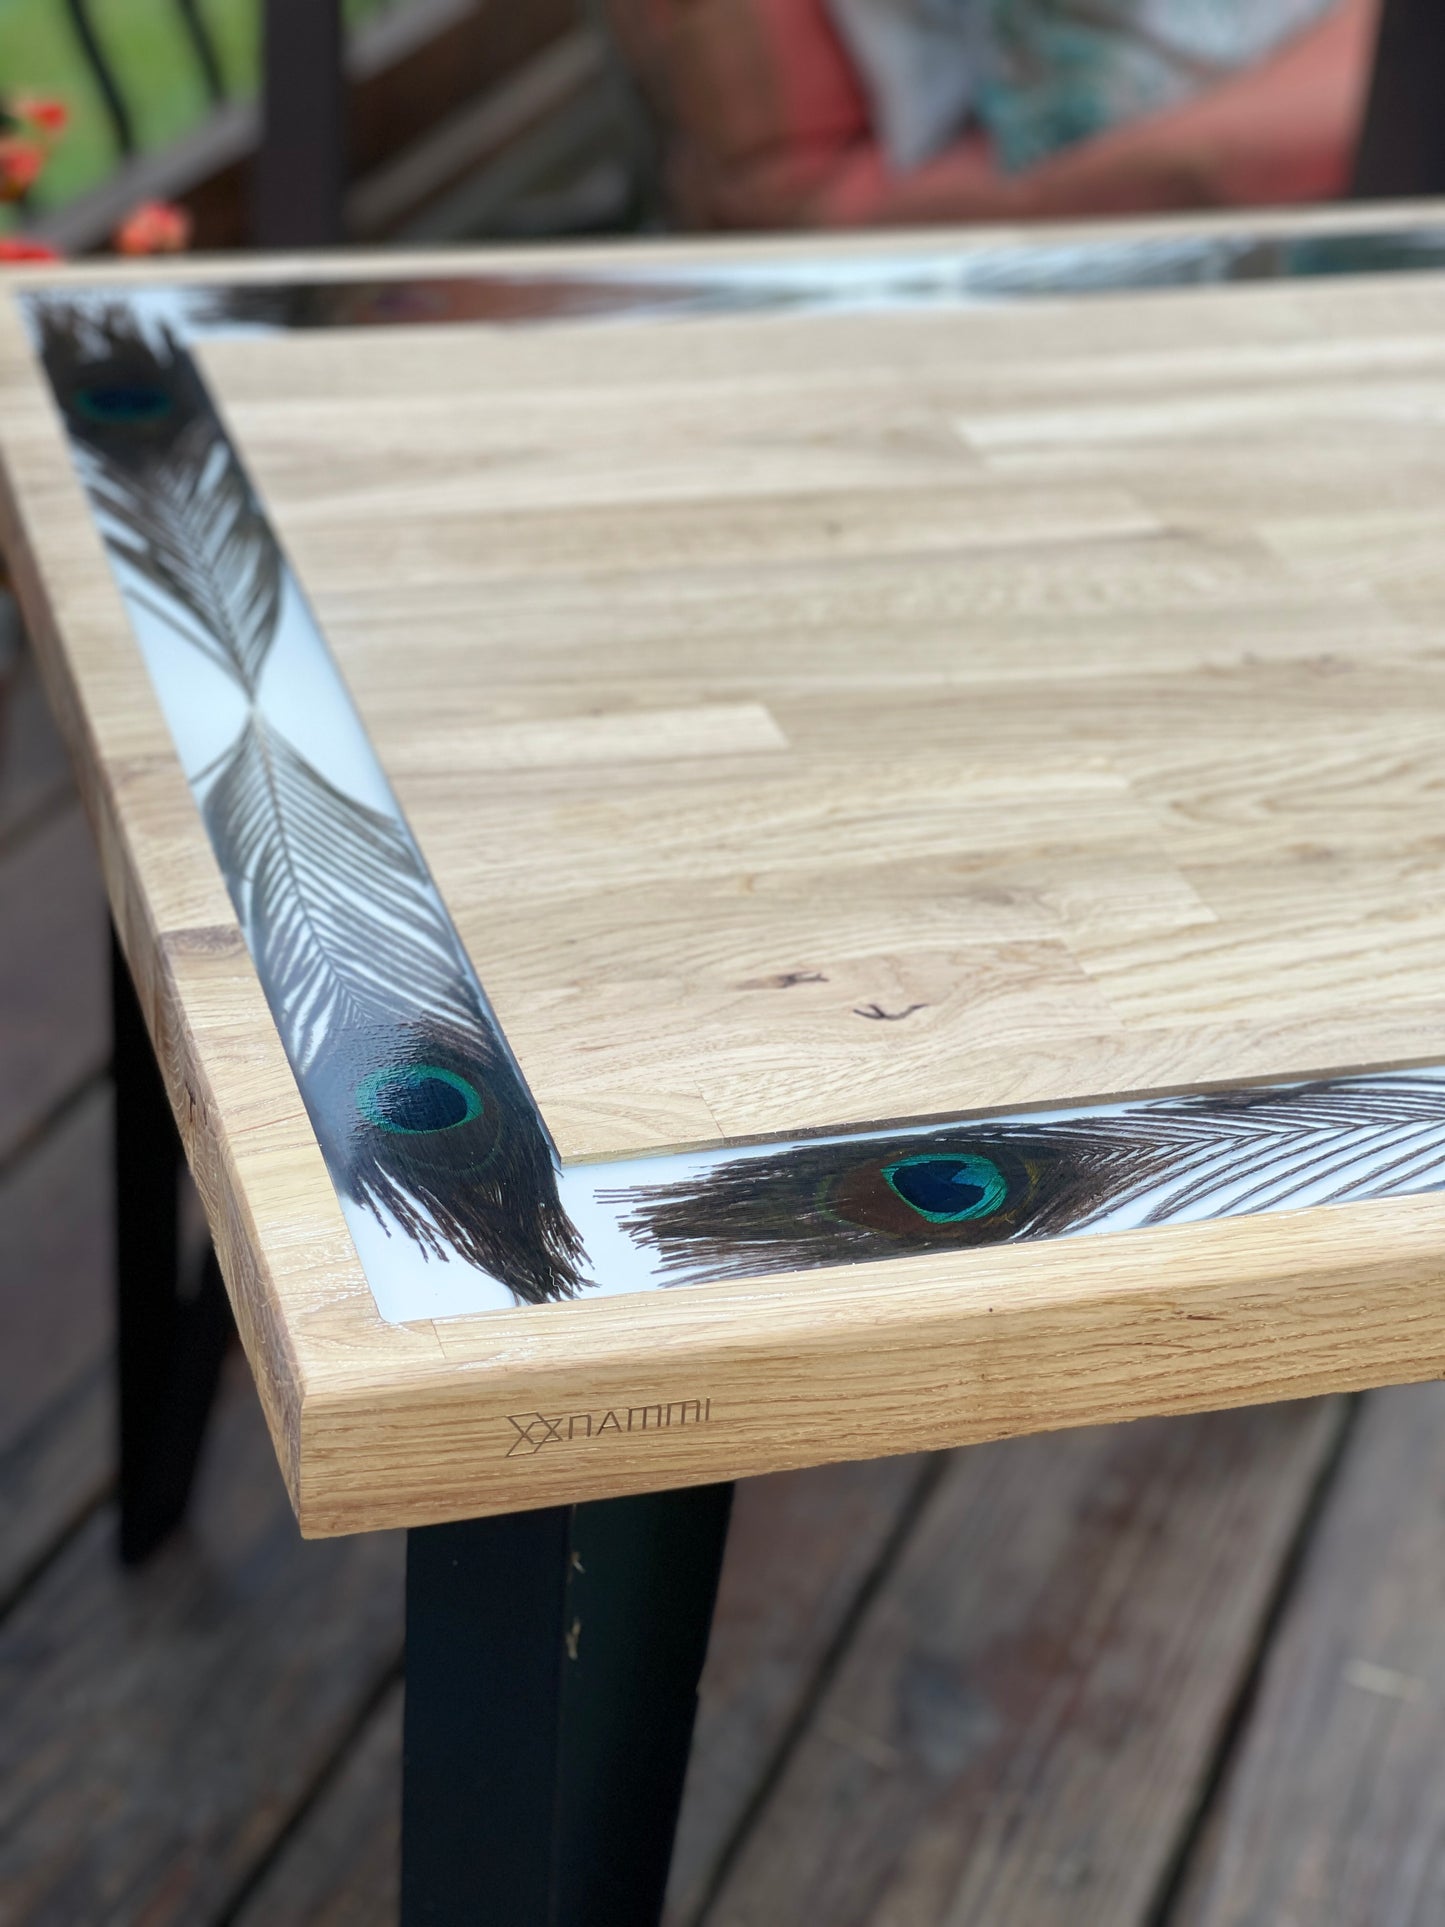 23"x23"x19" Square Table. Pattern: Peacock Flower